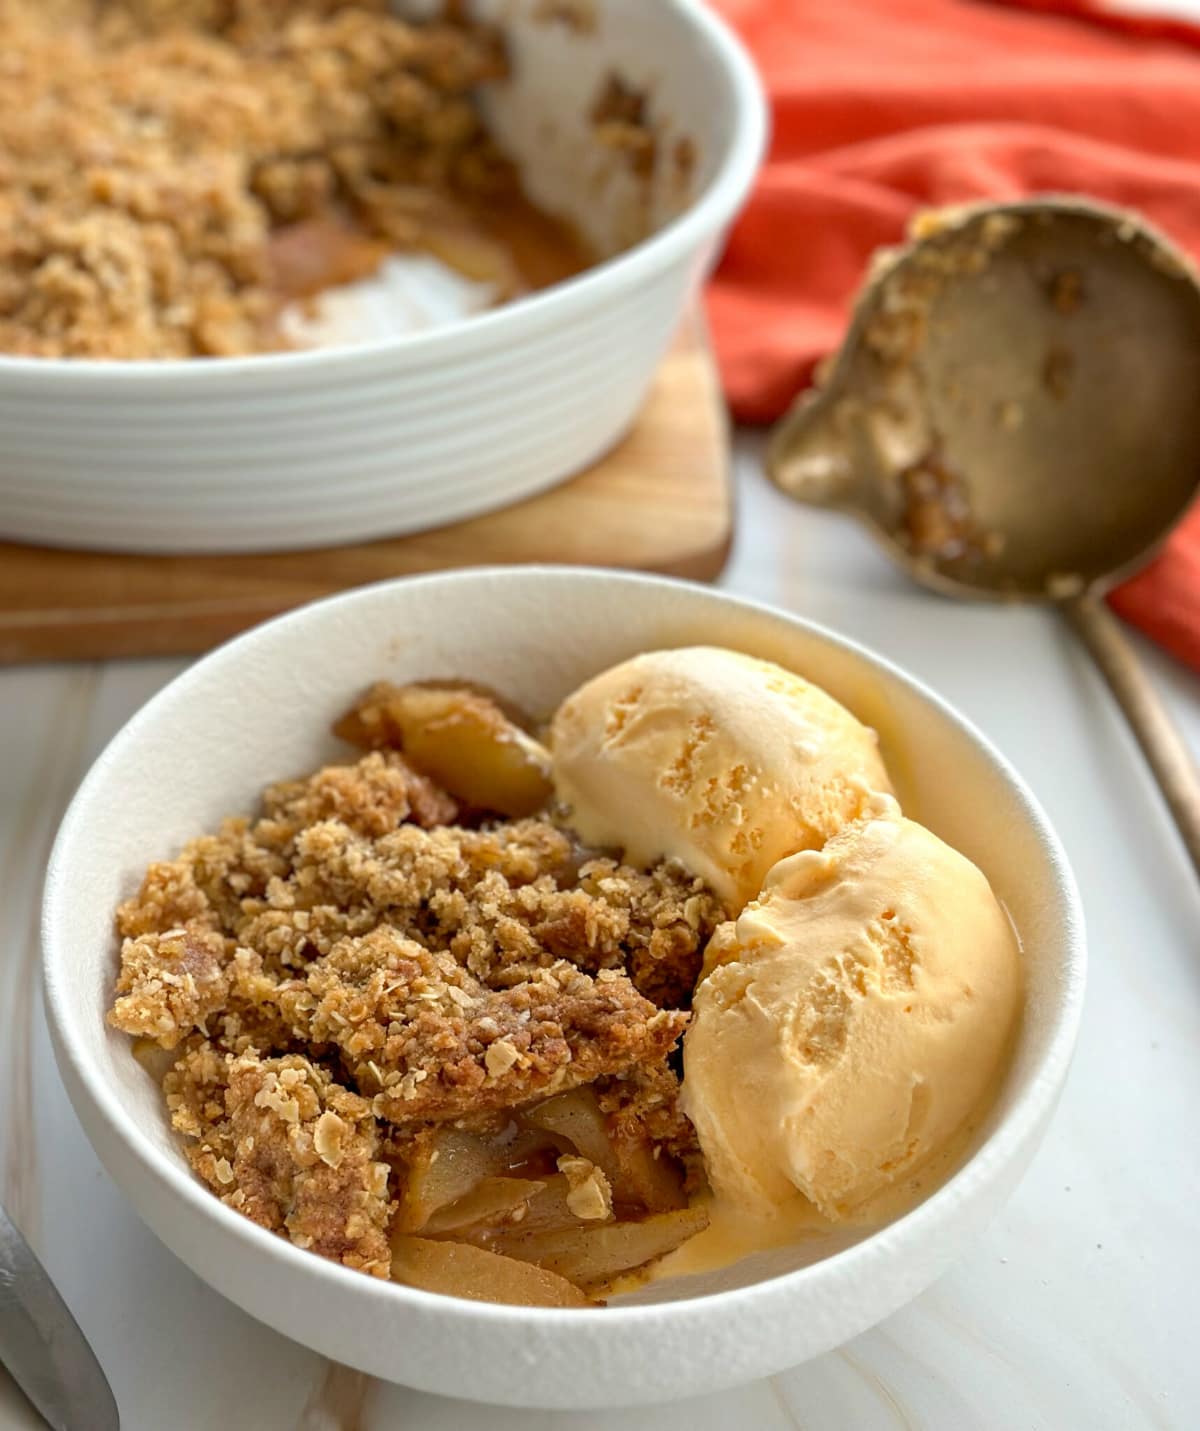 A serving of apple oat crumble crisp, served in a white bowl with two scoops of vanilla ice cream